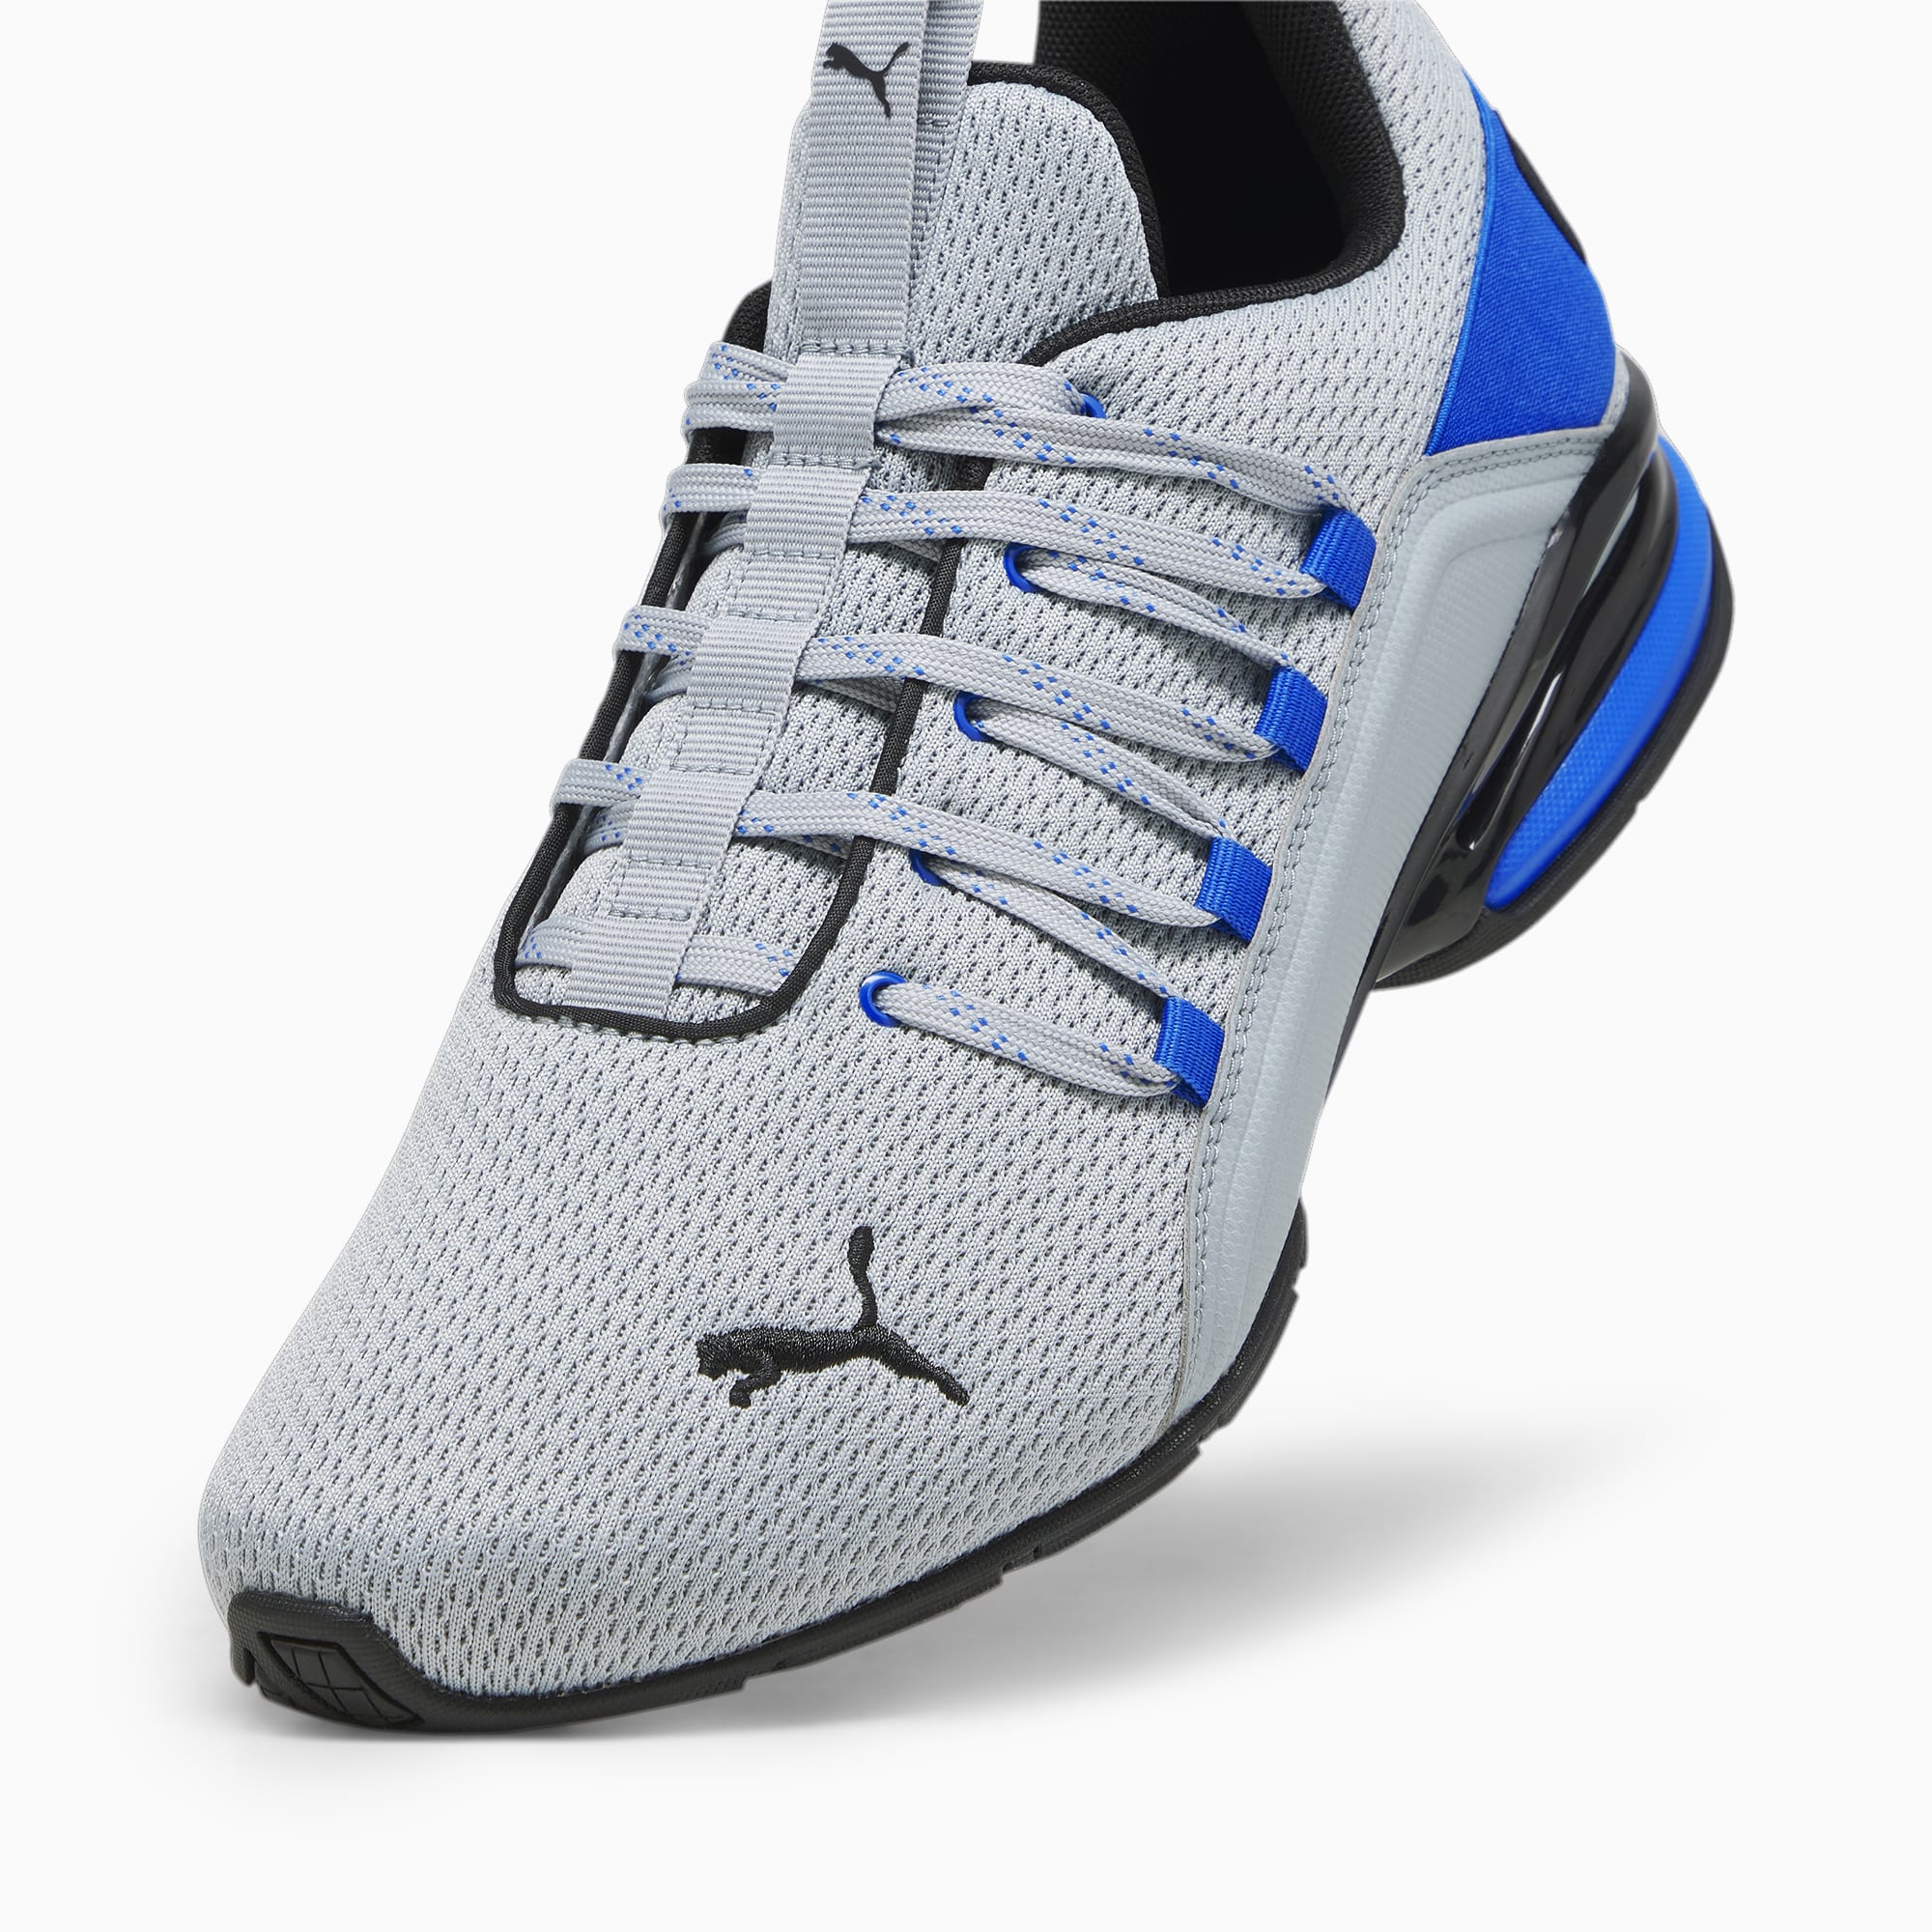 PUMA Axelion Refresh Running Shoes Men, Cool Mid Grey/Ultra Blue/Black, Size 39, Shoes